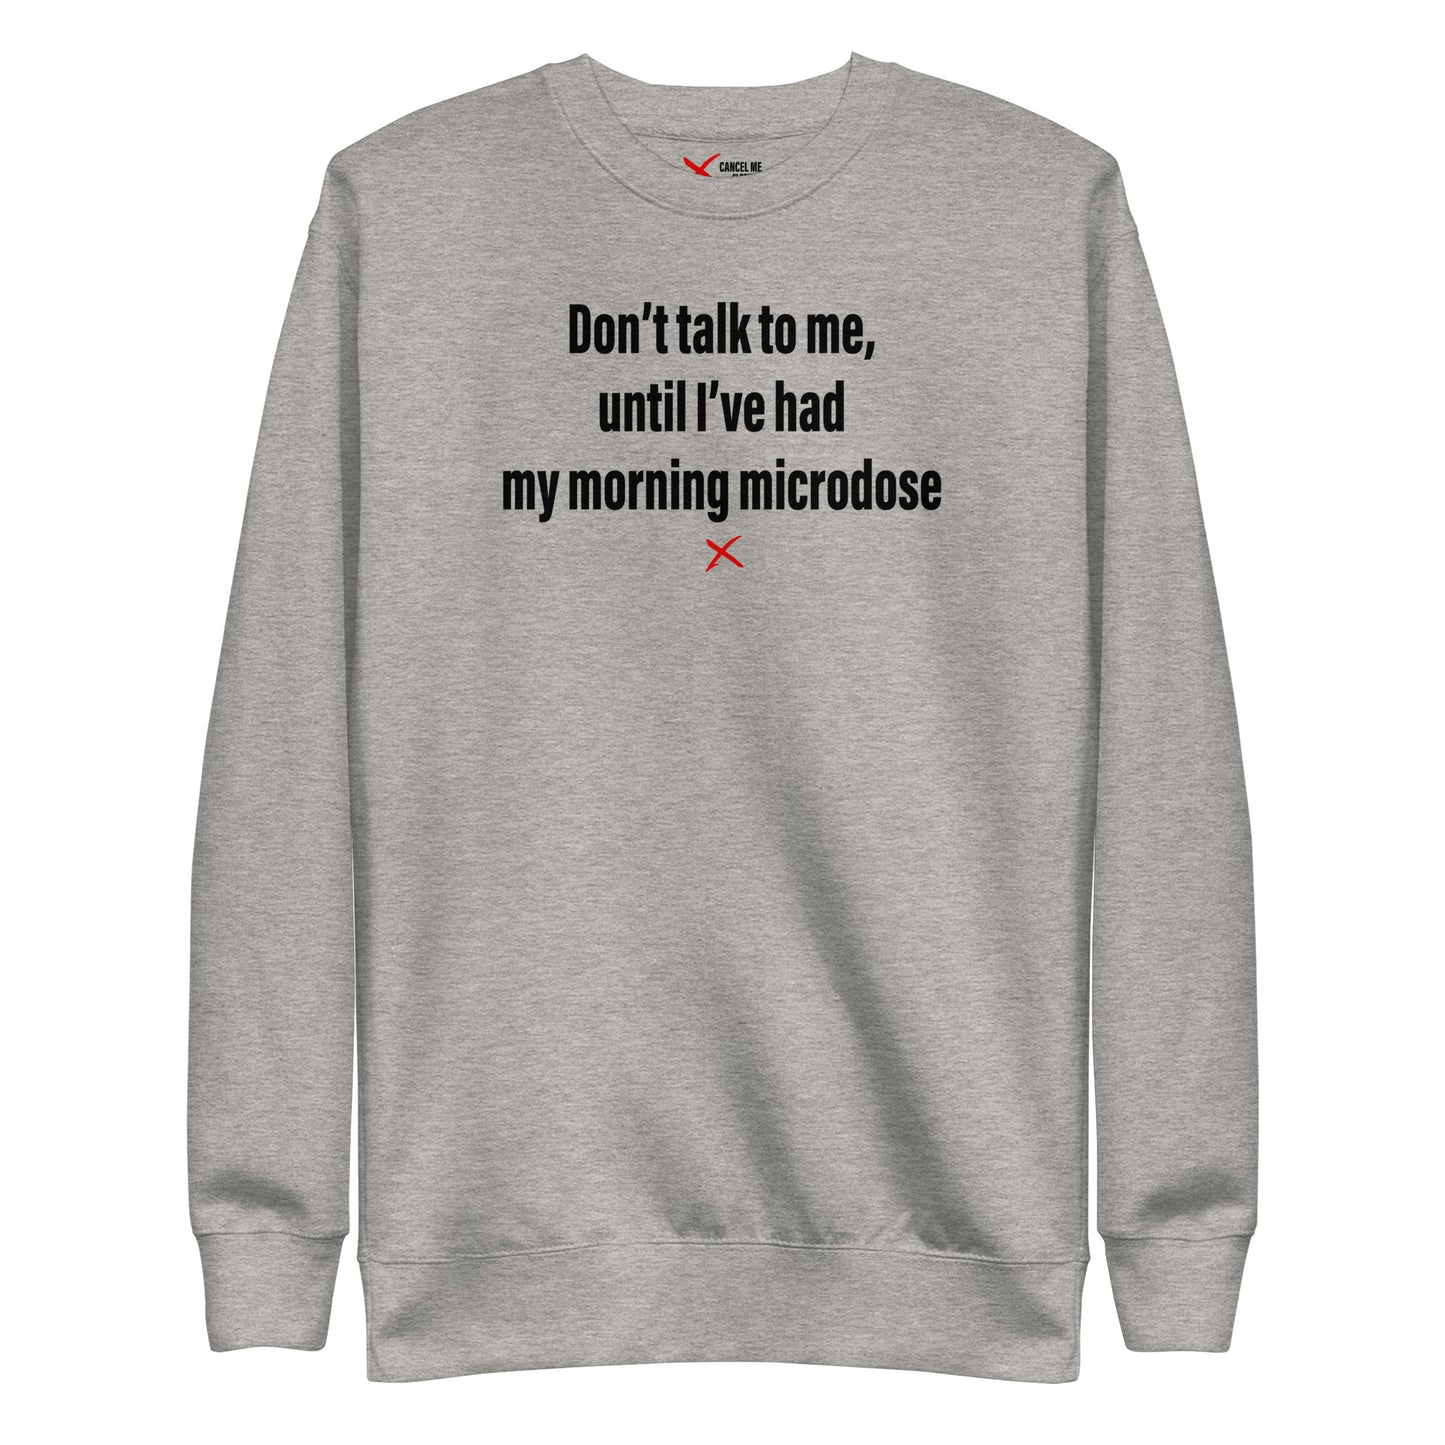 Don't talk to me, until I've had my morning microdose - Sweatshirt